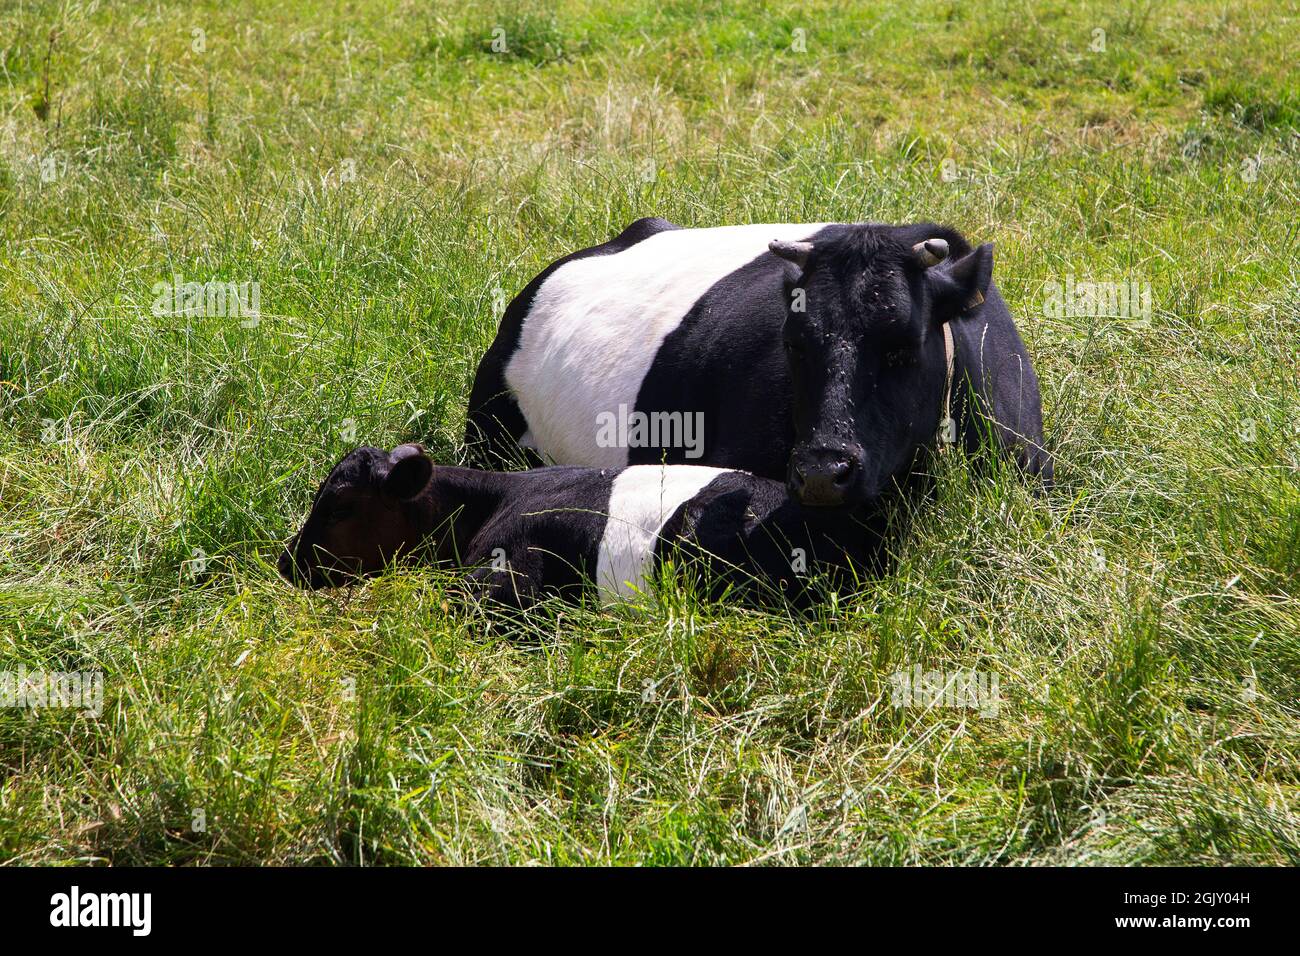 Belted cow with young calf resting in tall grass Stock Photo